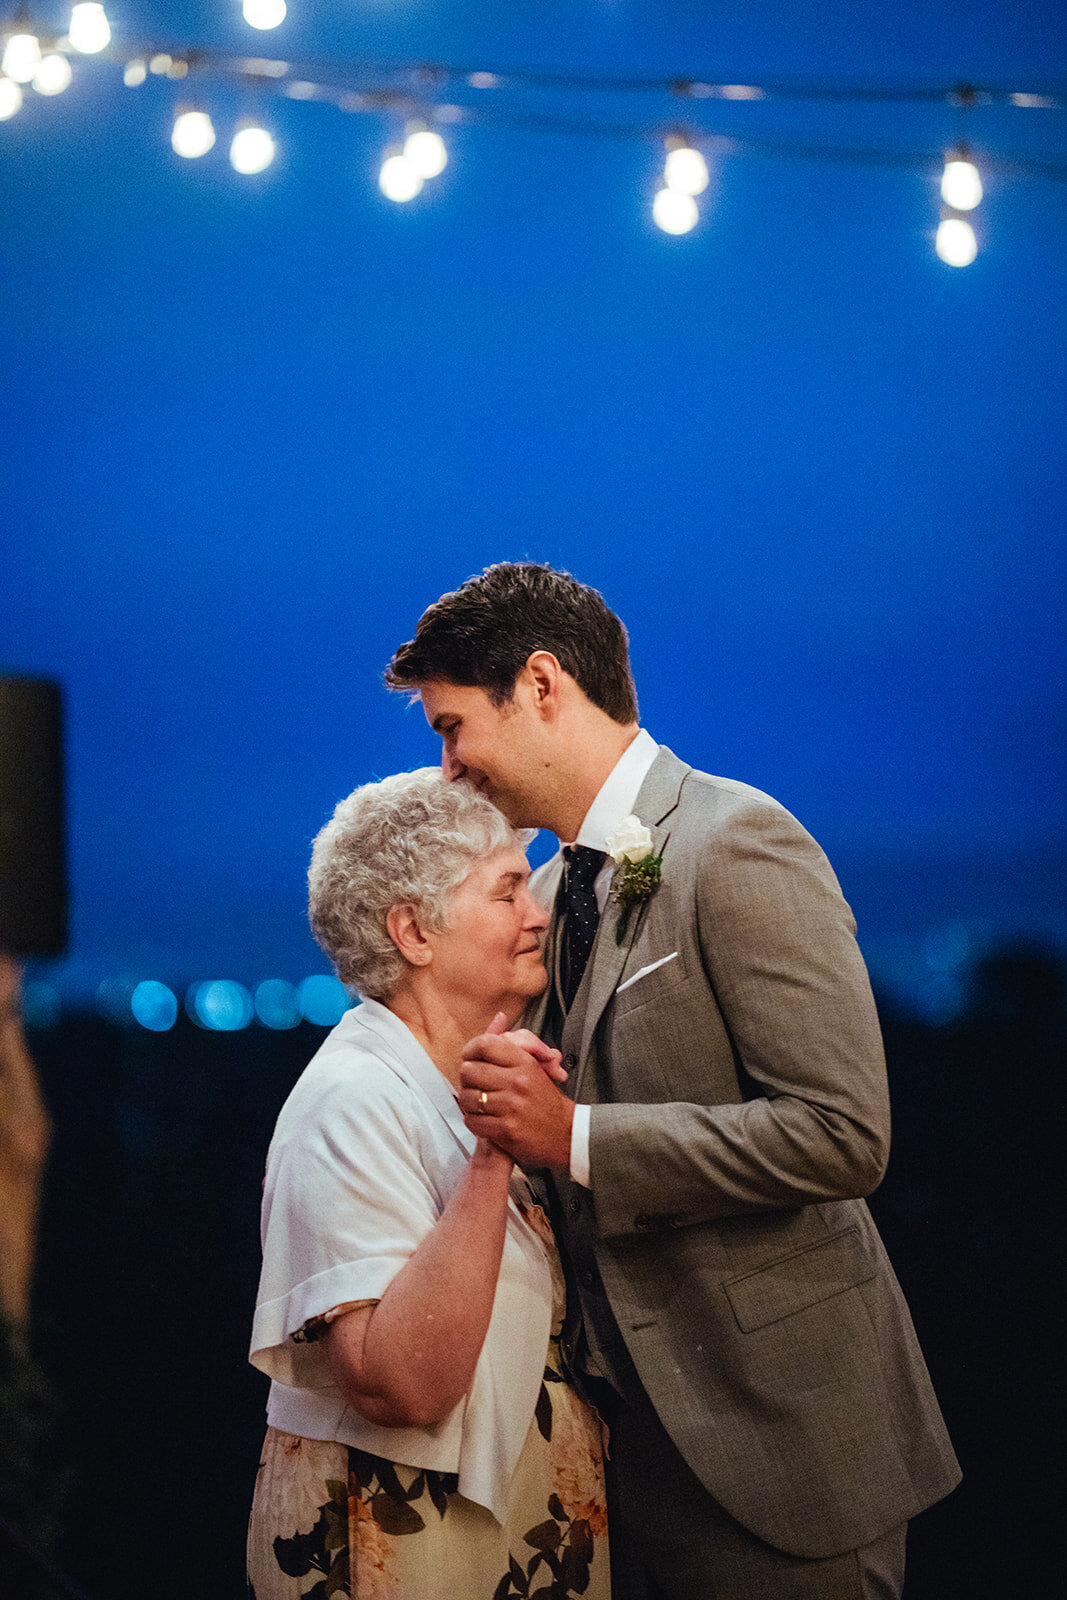 Groom dancing with his mother at wedding reception in LA Shawnee Custalow Queer Photography